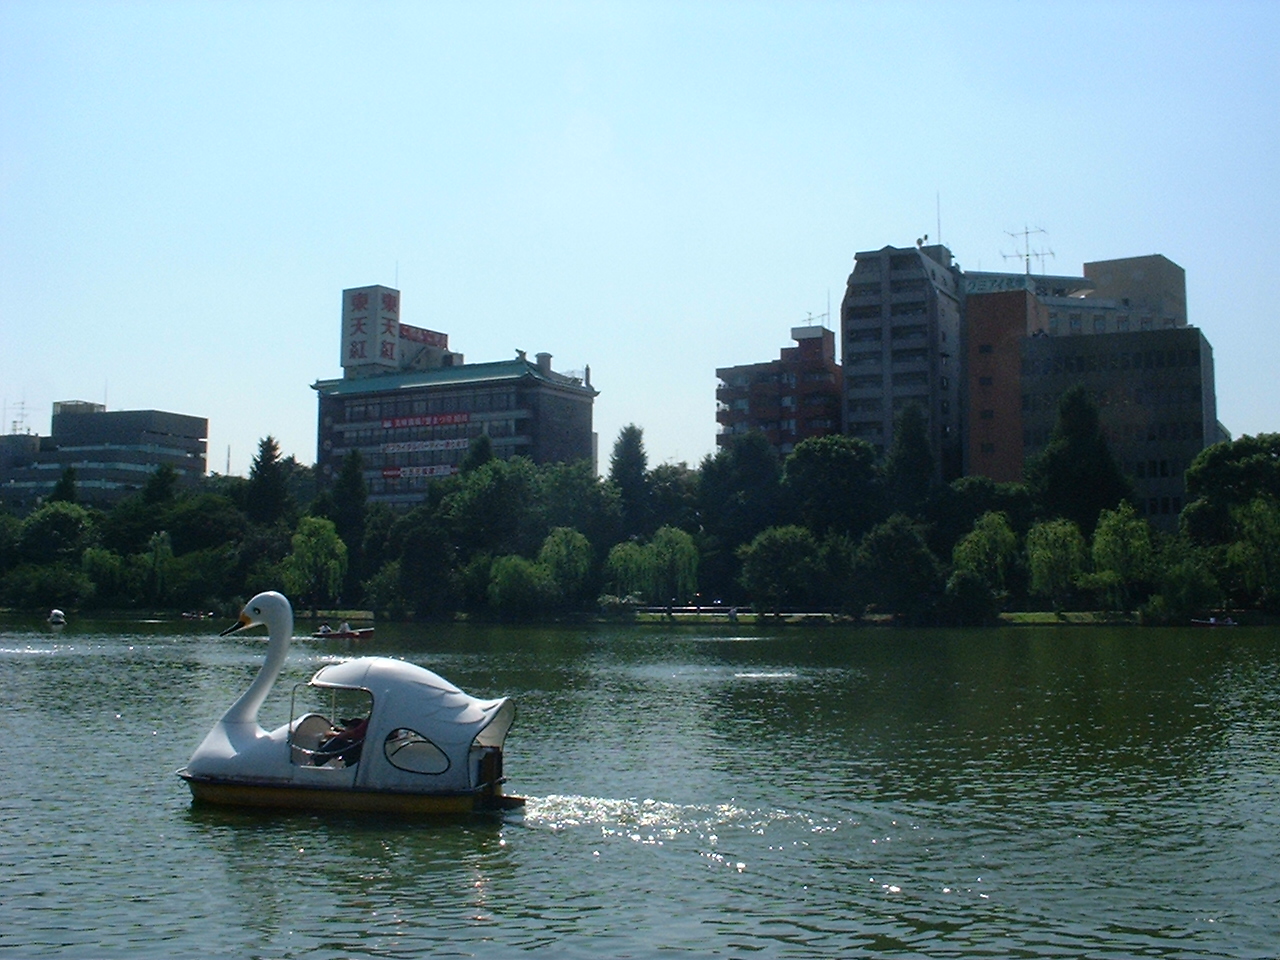 a swan paddleboat in the pond with trees and buildings in the background